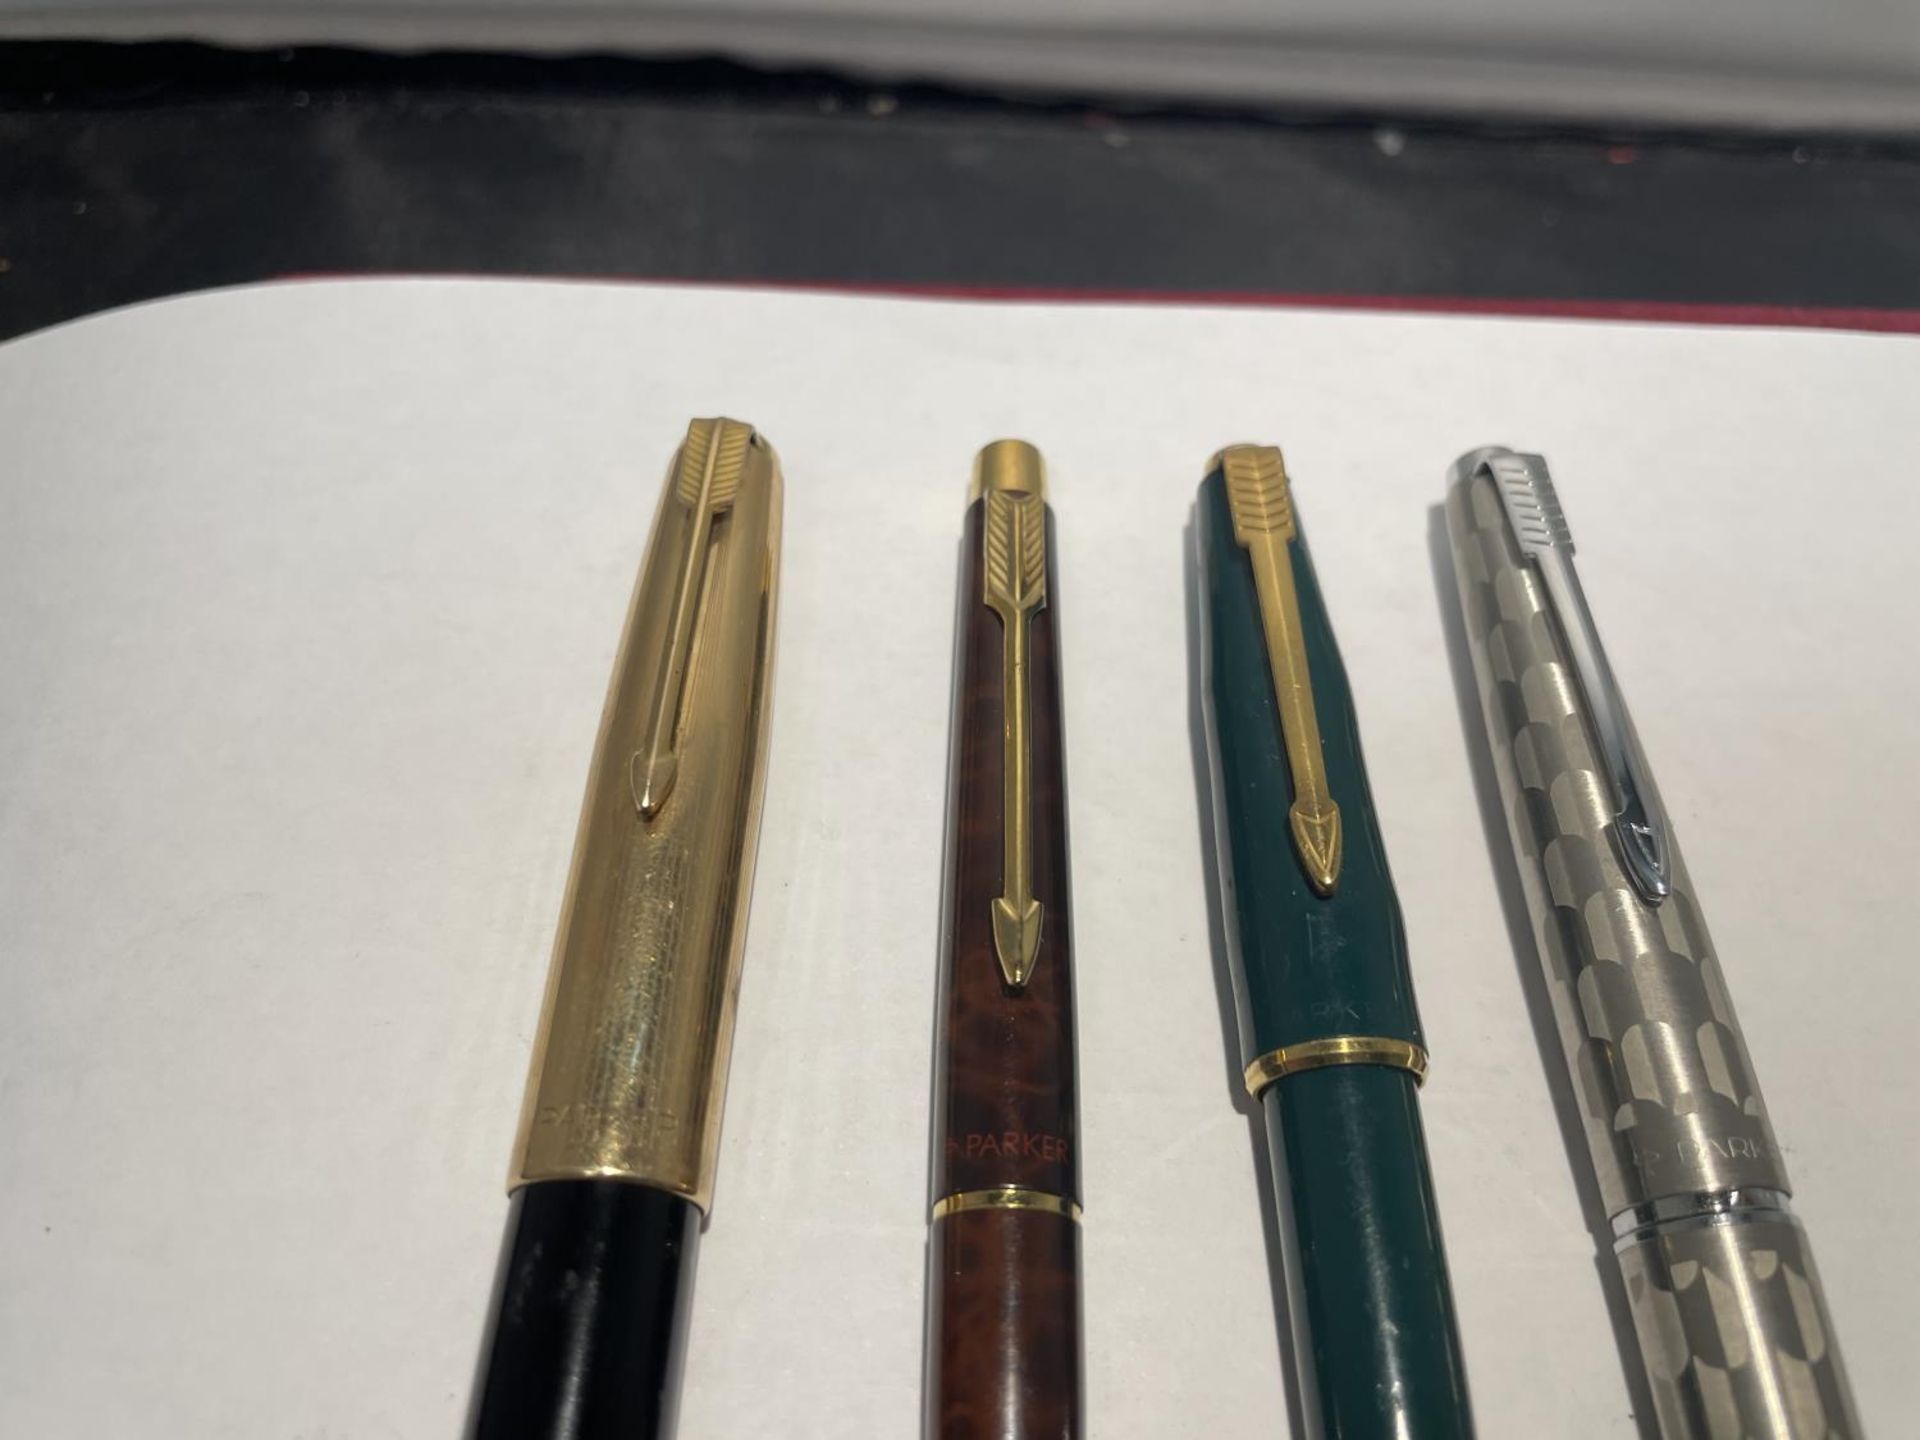 FOUR VINTAGE PARKER FOUNTAIN PENS WITH 14 CARAT GOLD NIBS - Image 2 of 3